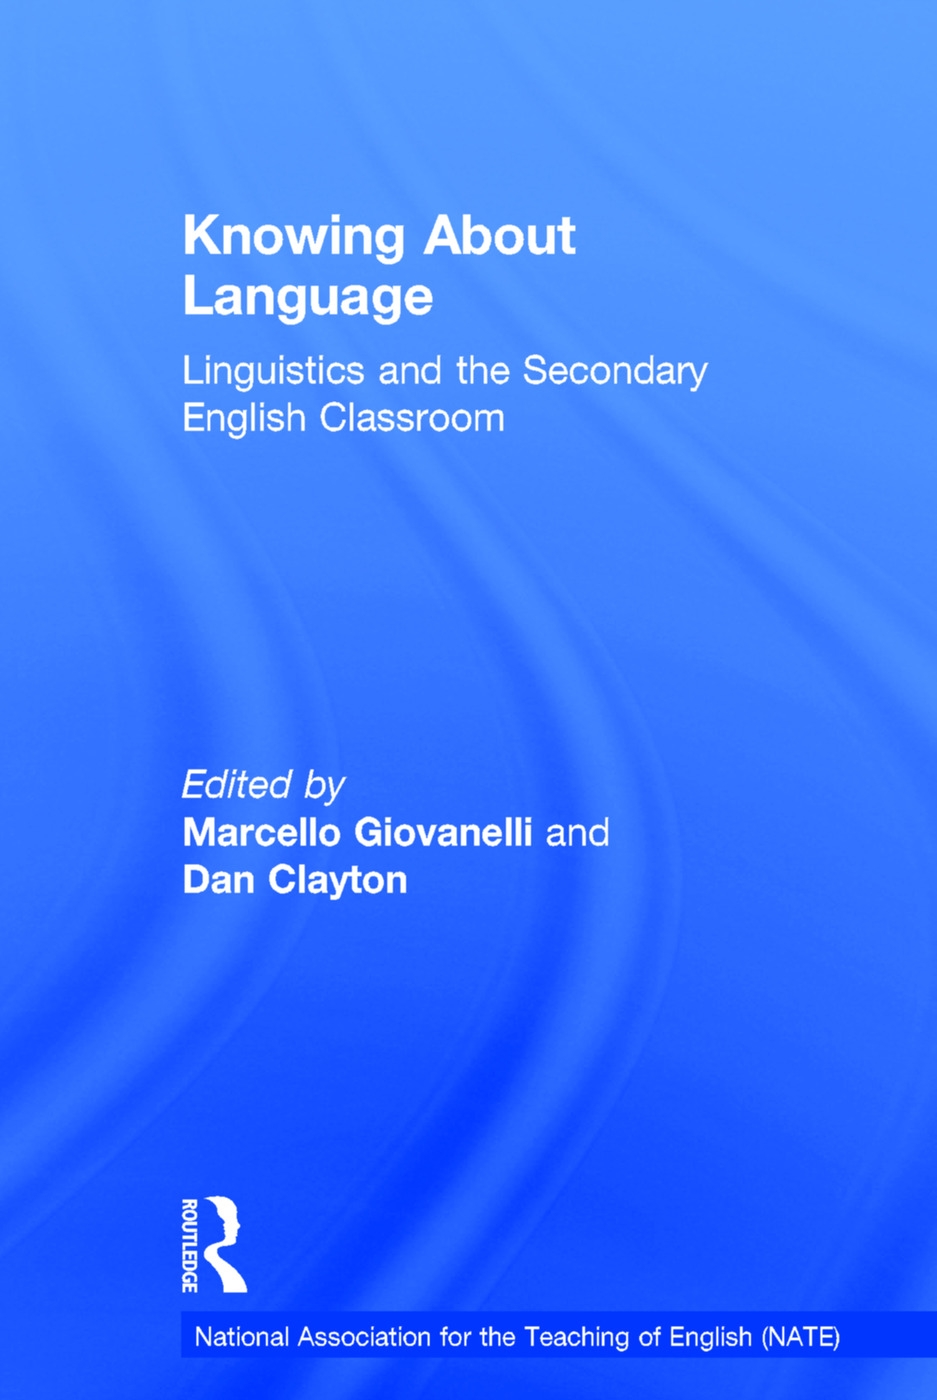 Knowing about Language: Linguistics and the Secondary English Classroom